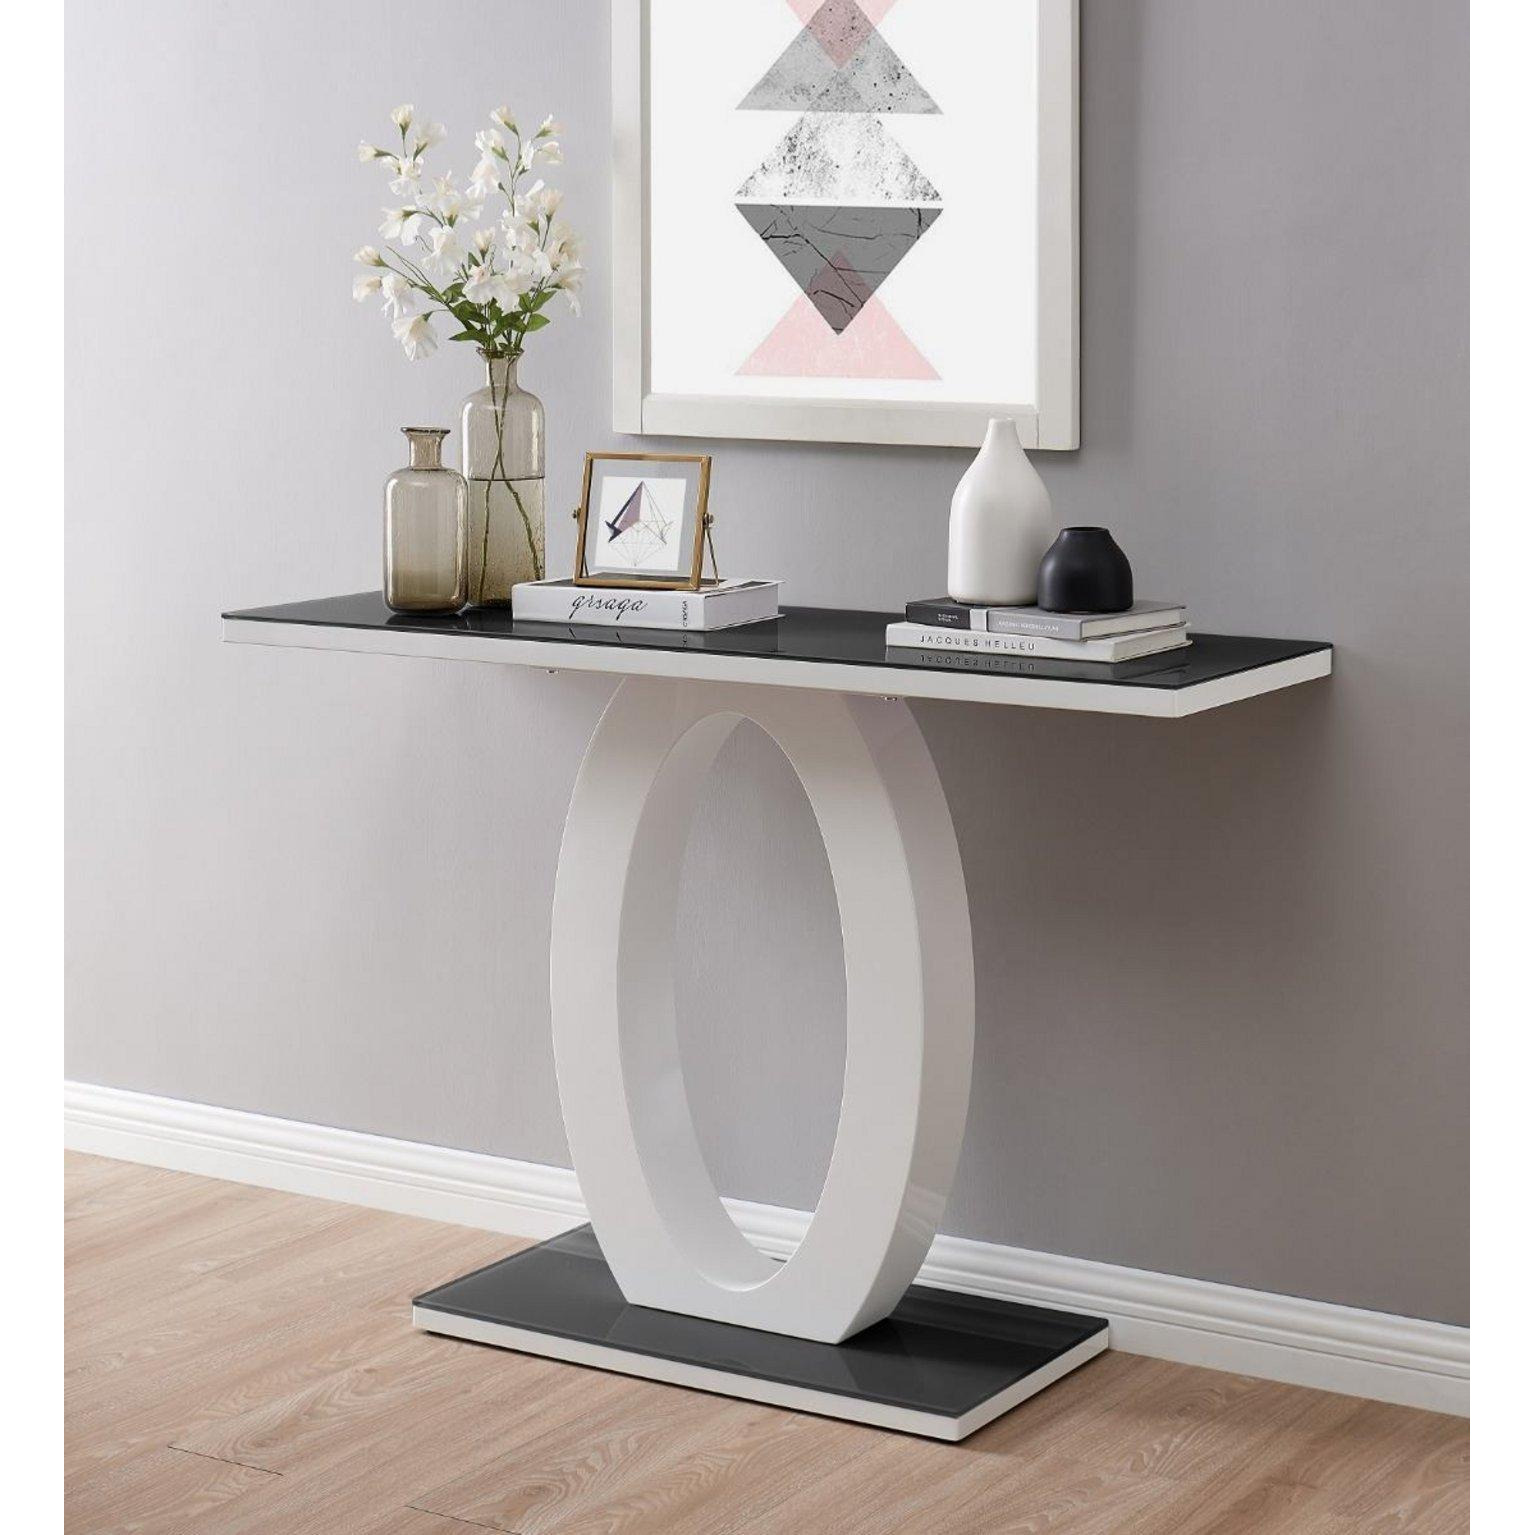 Giovani Rectangular White High Gloss Console Table with Glass Top and Unique Halo Structural Plinth Base Design - image 1